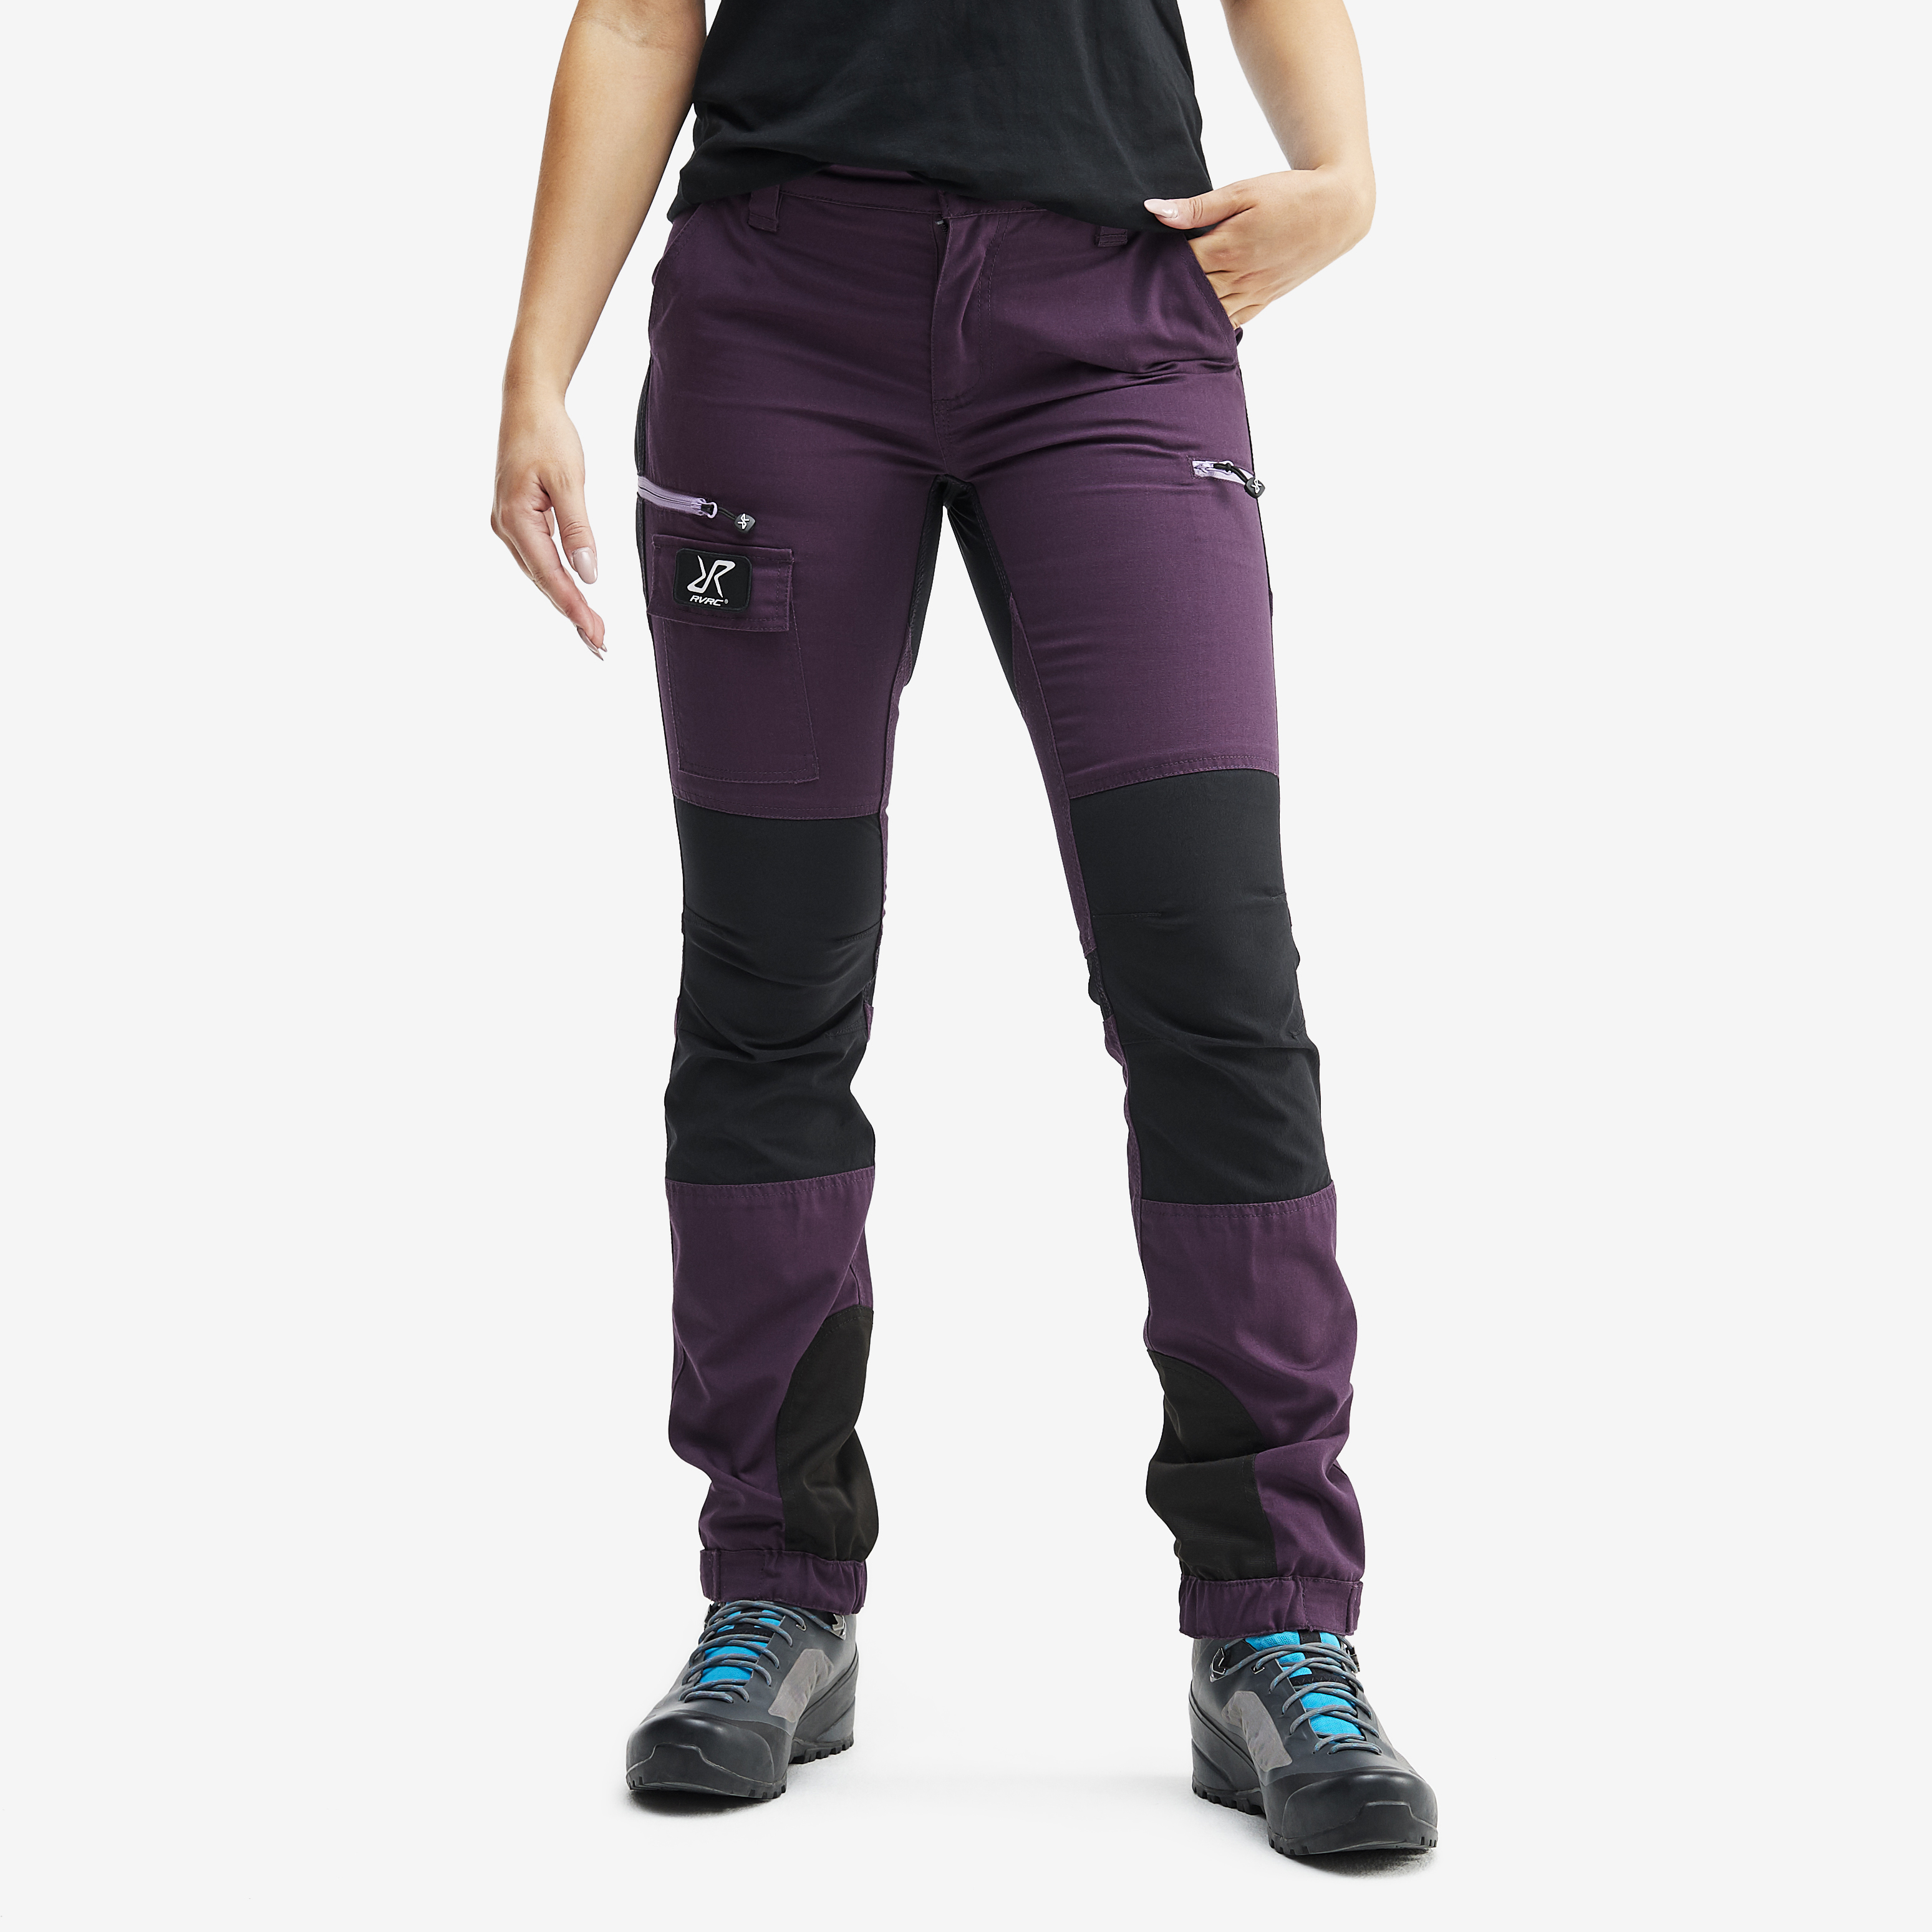 Nordwand Pants Blackberry Wine Donna